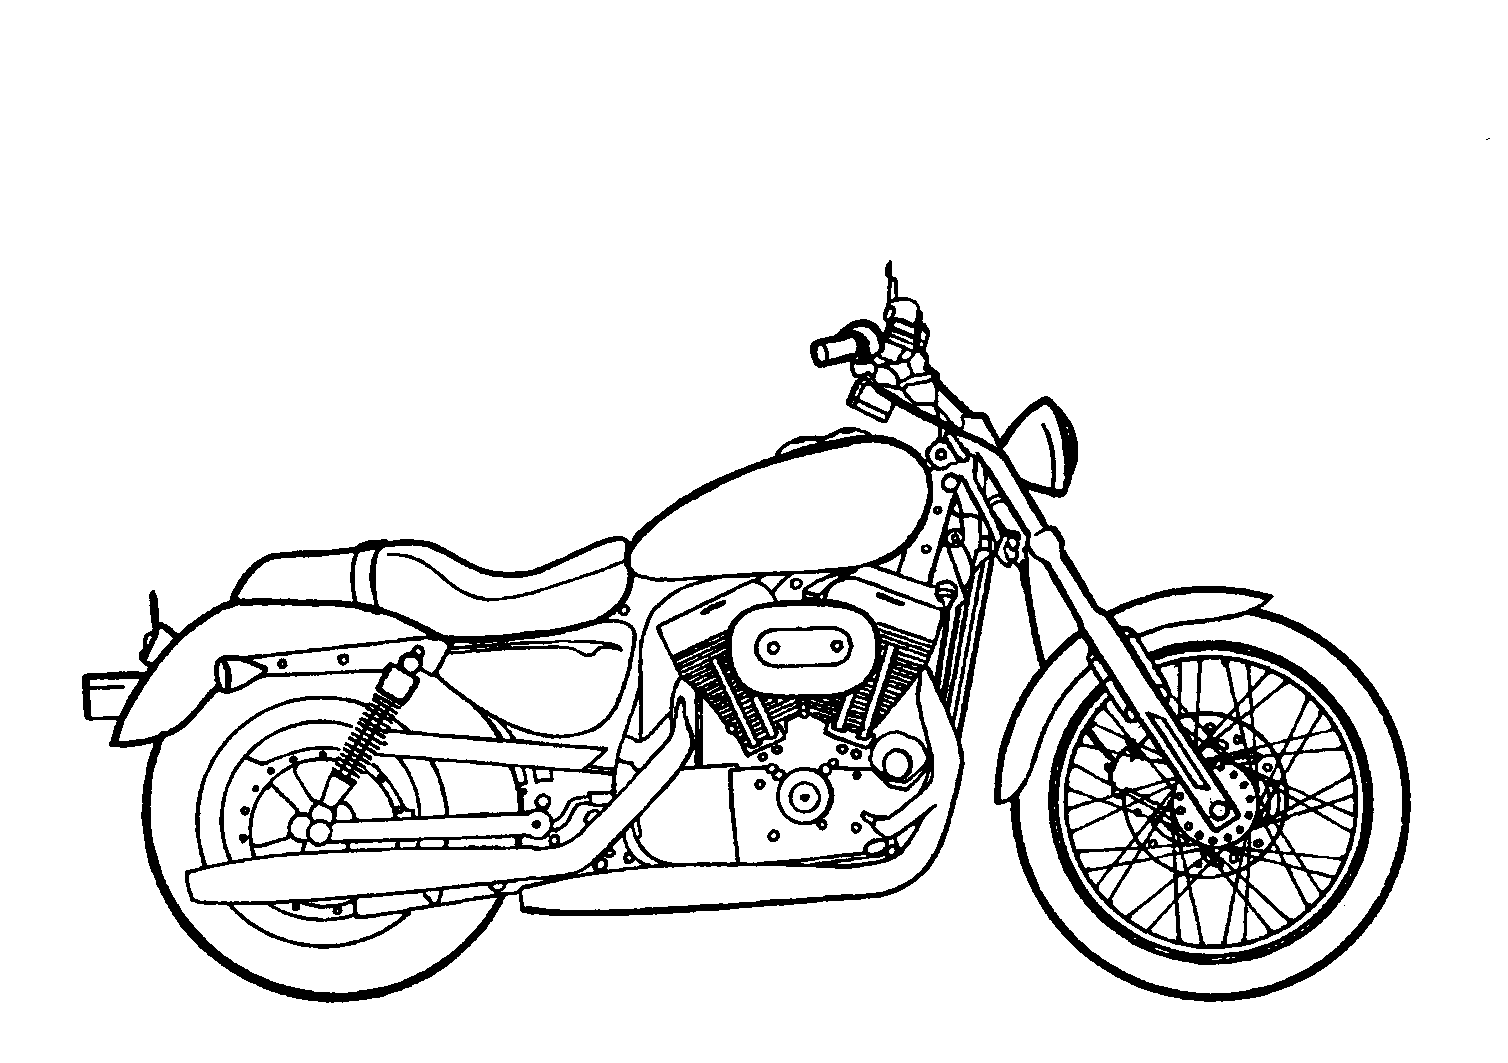 free-motorcycle-black-and-white-clipart-download-free-motorcycle-black